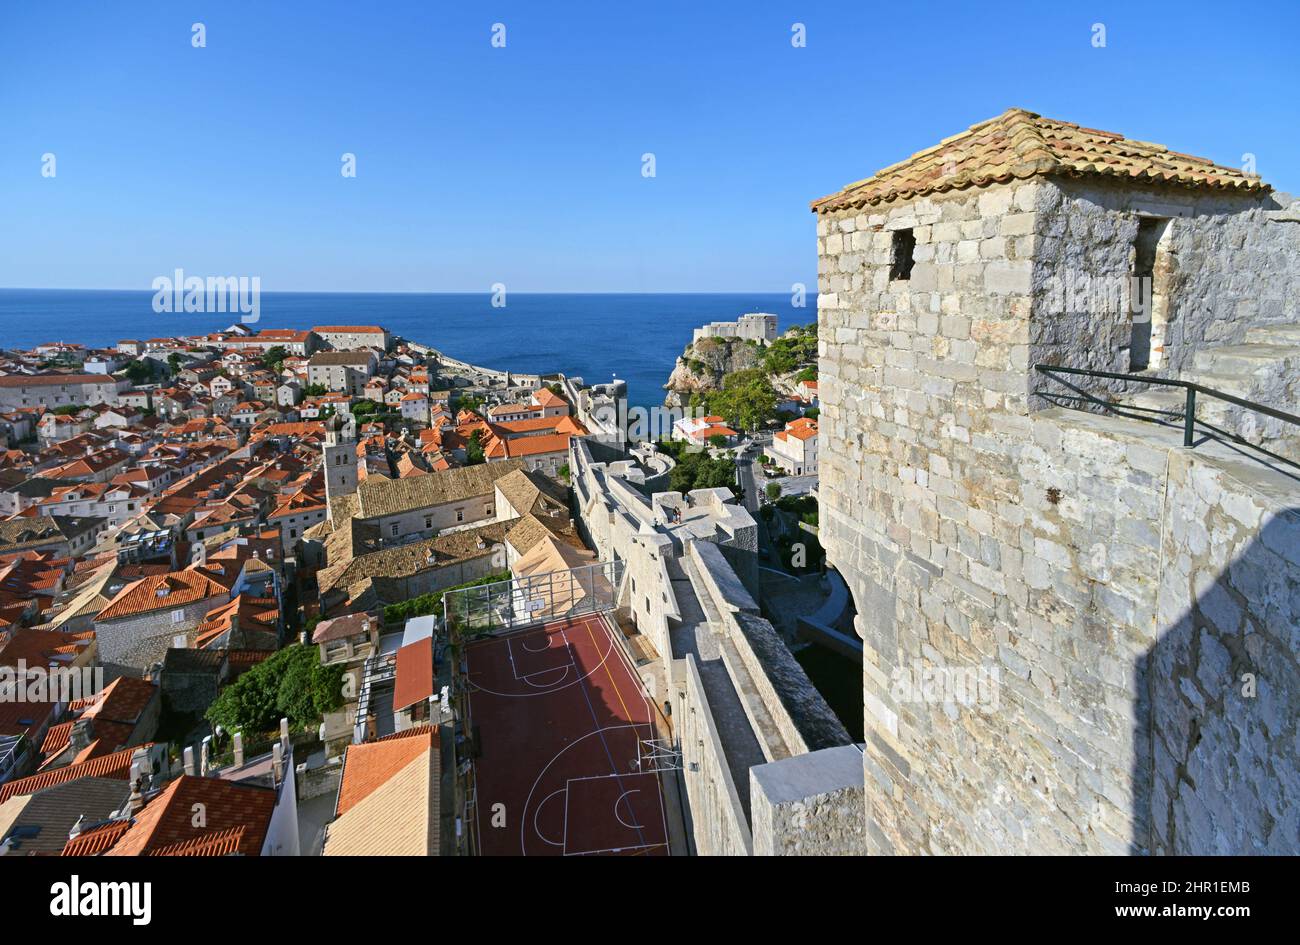 view onto the historic old town from the city wall (13th century), fortress Lovrijenac in the background, Croatia, Dubrovnik Stock Photo